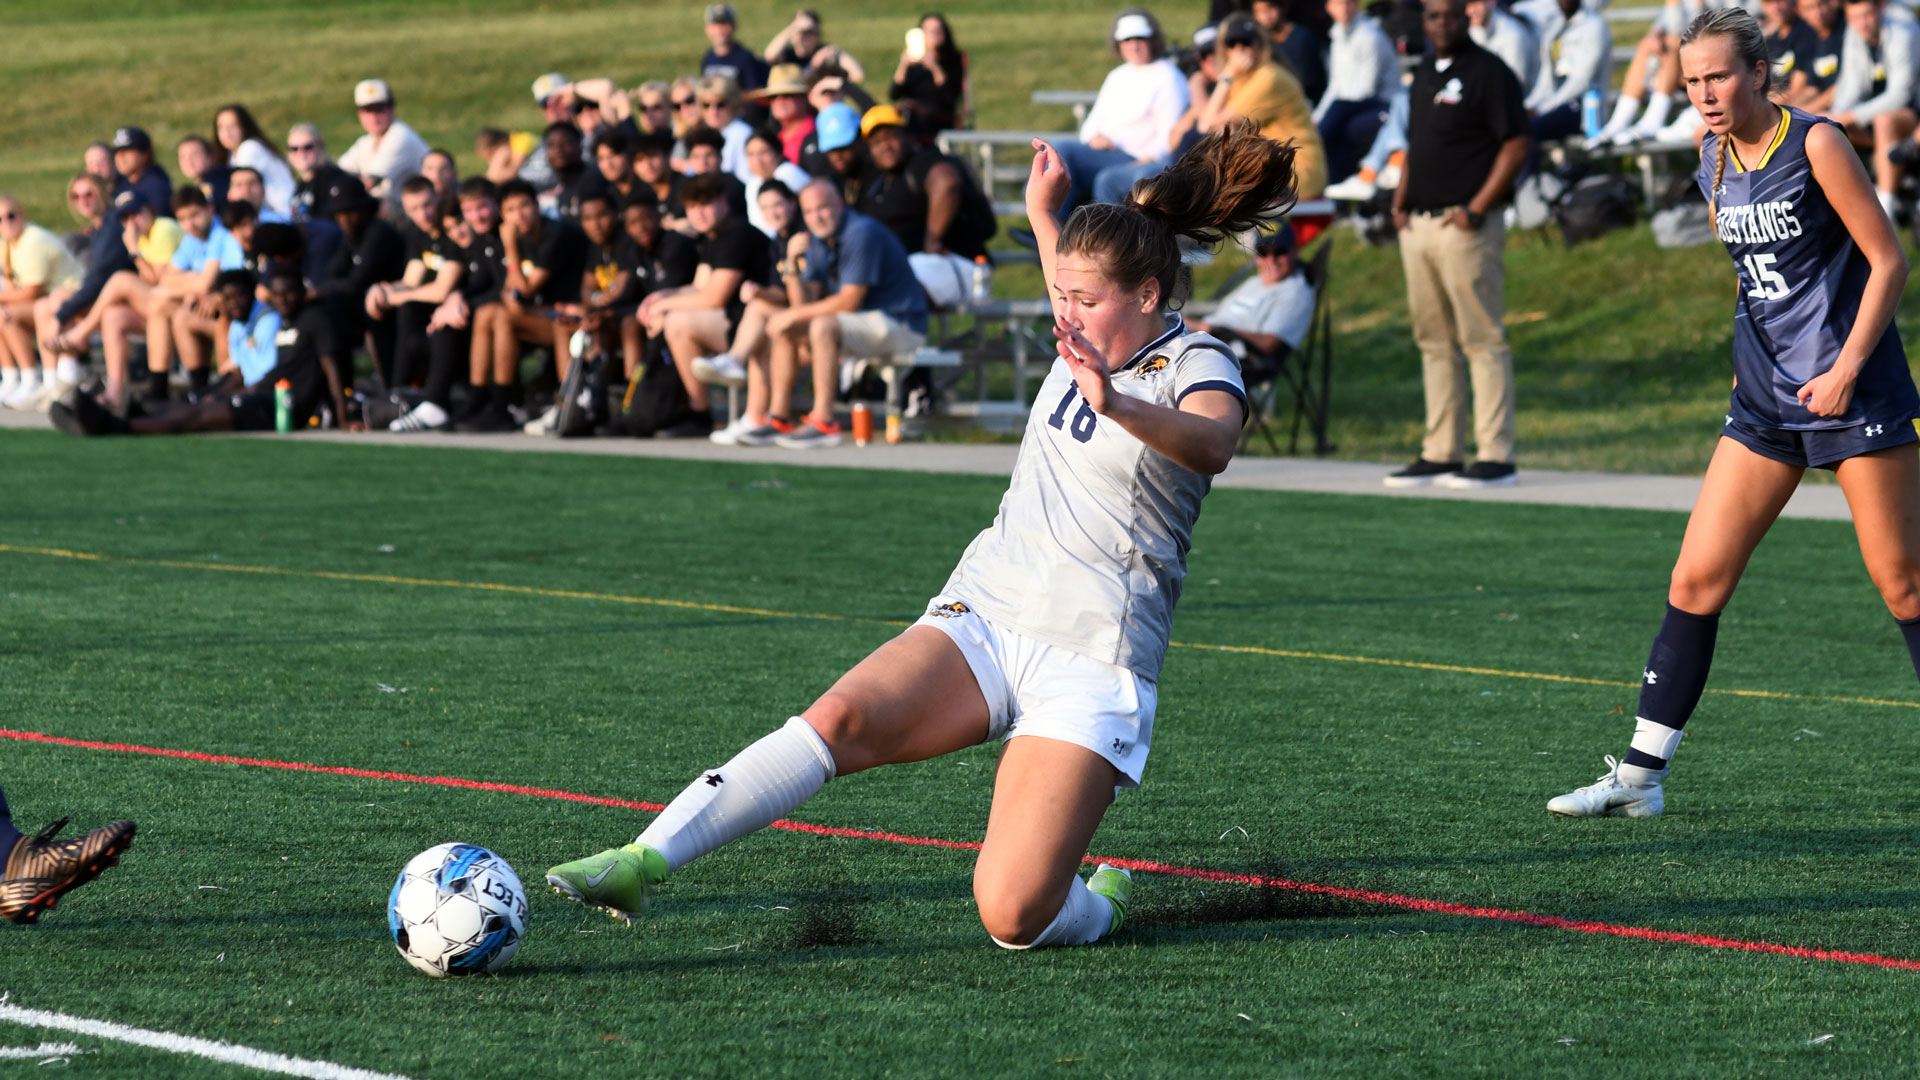 Shannon Catchur makes immediate impact upon return in Pride 2-0 win over Mount Mercy